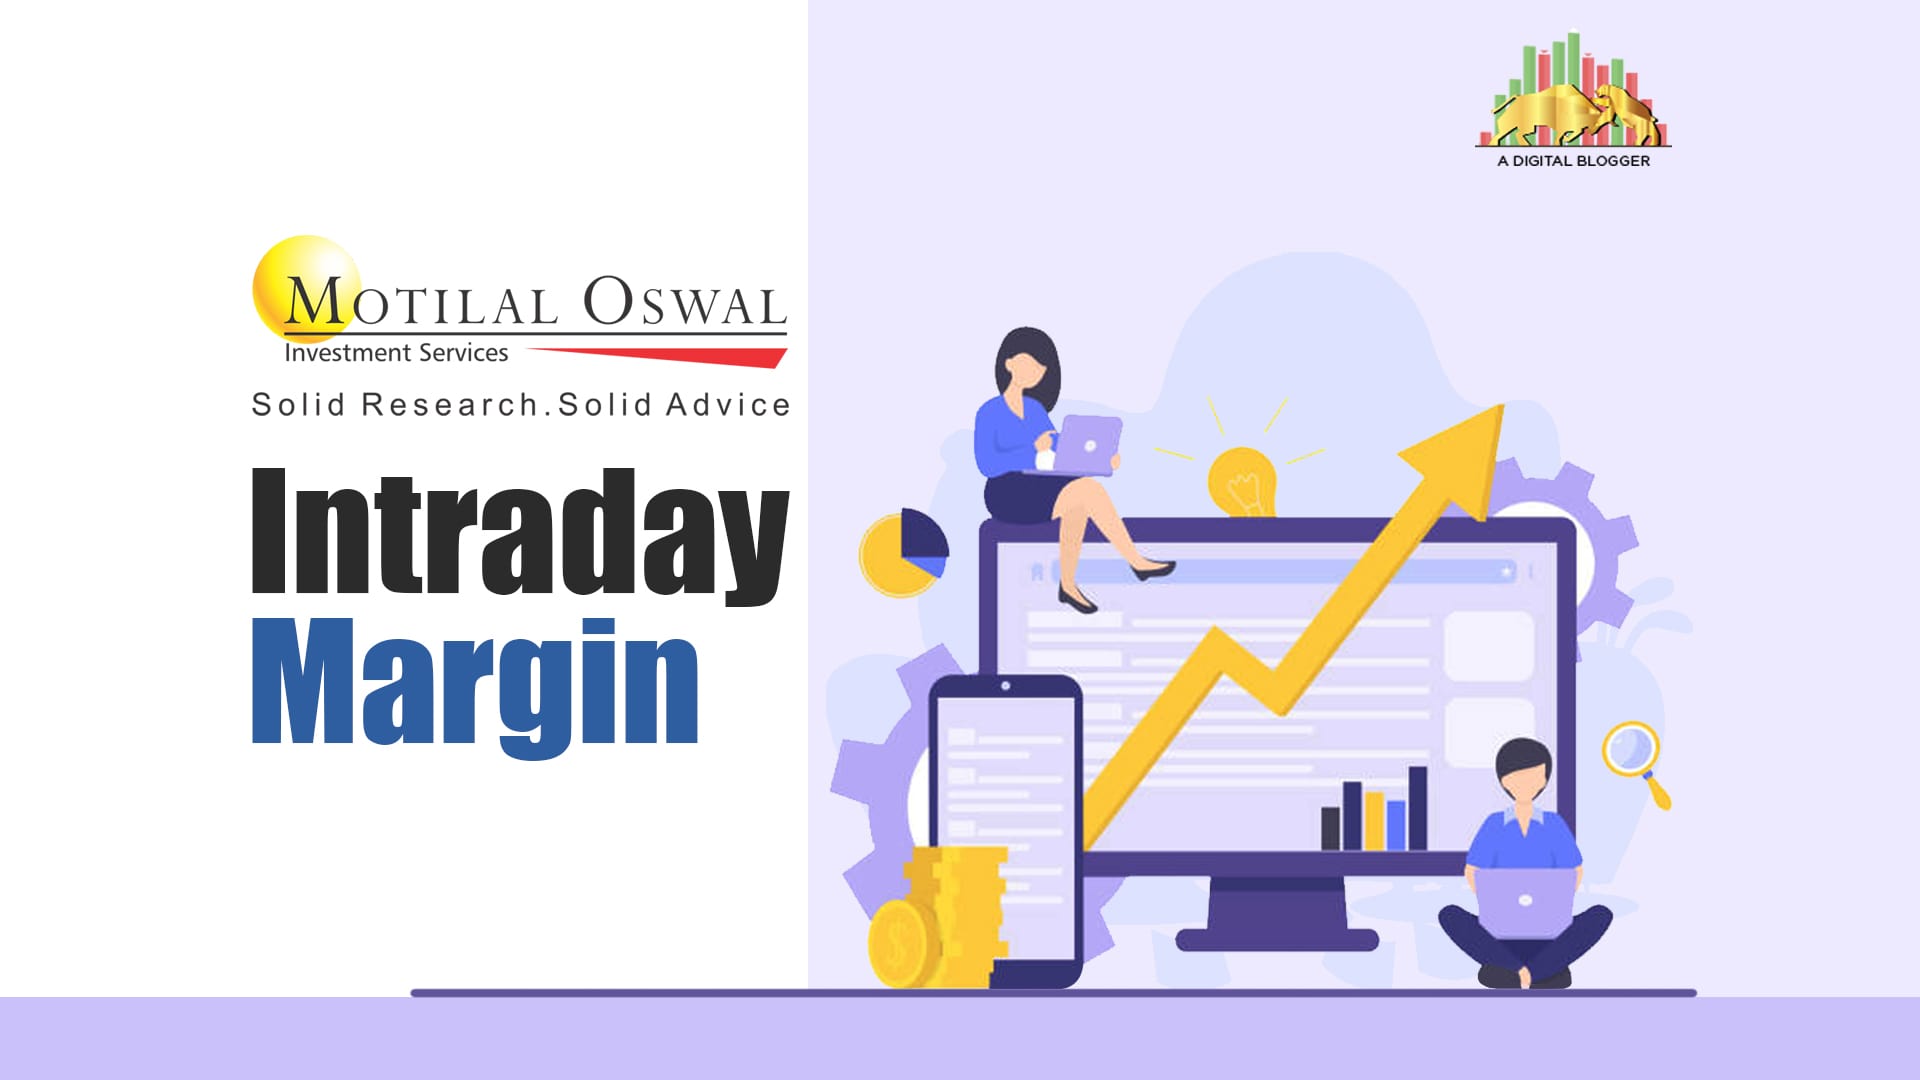 Motilal Oswal Intraday Margin | Details, Services, Timing ...